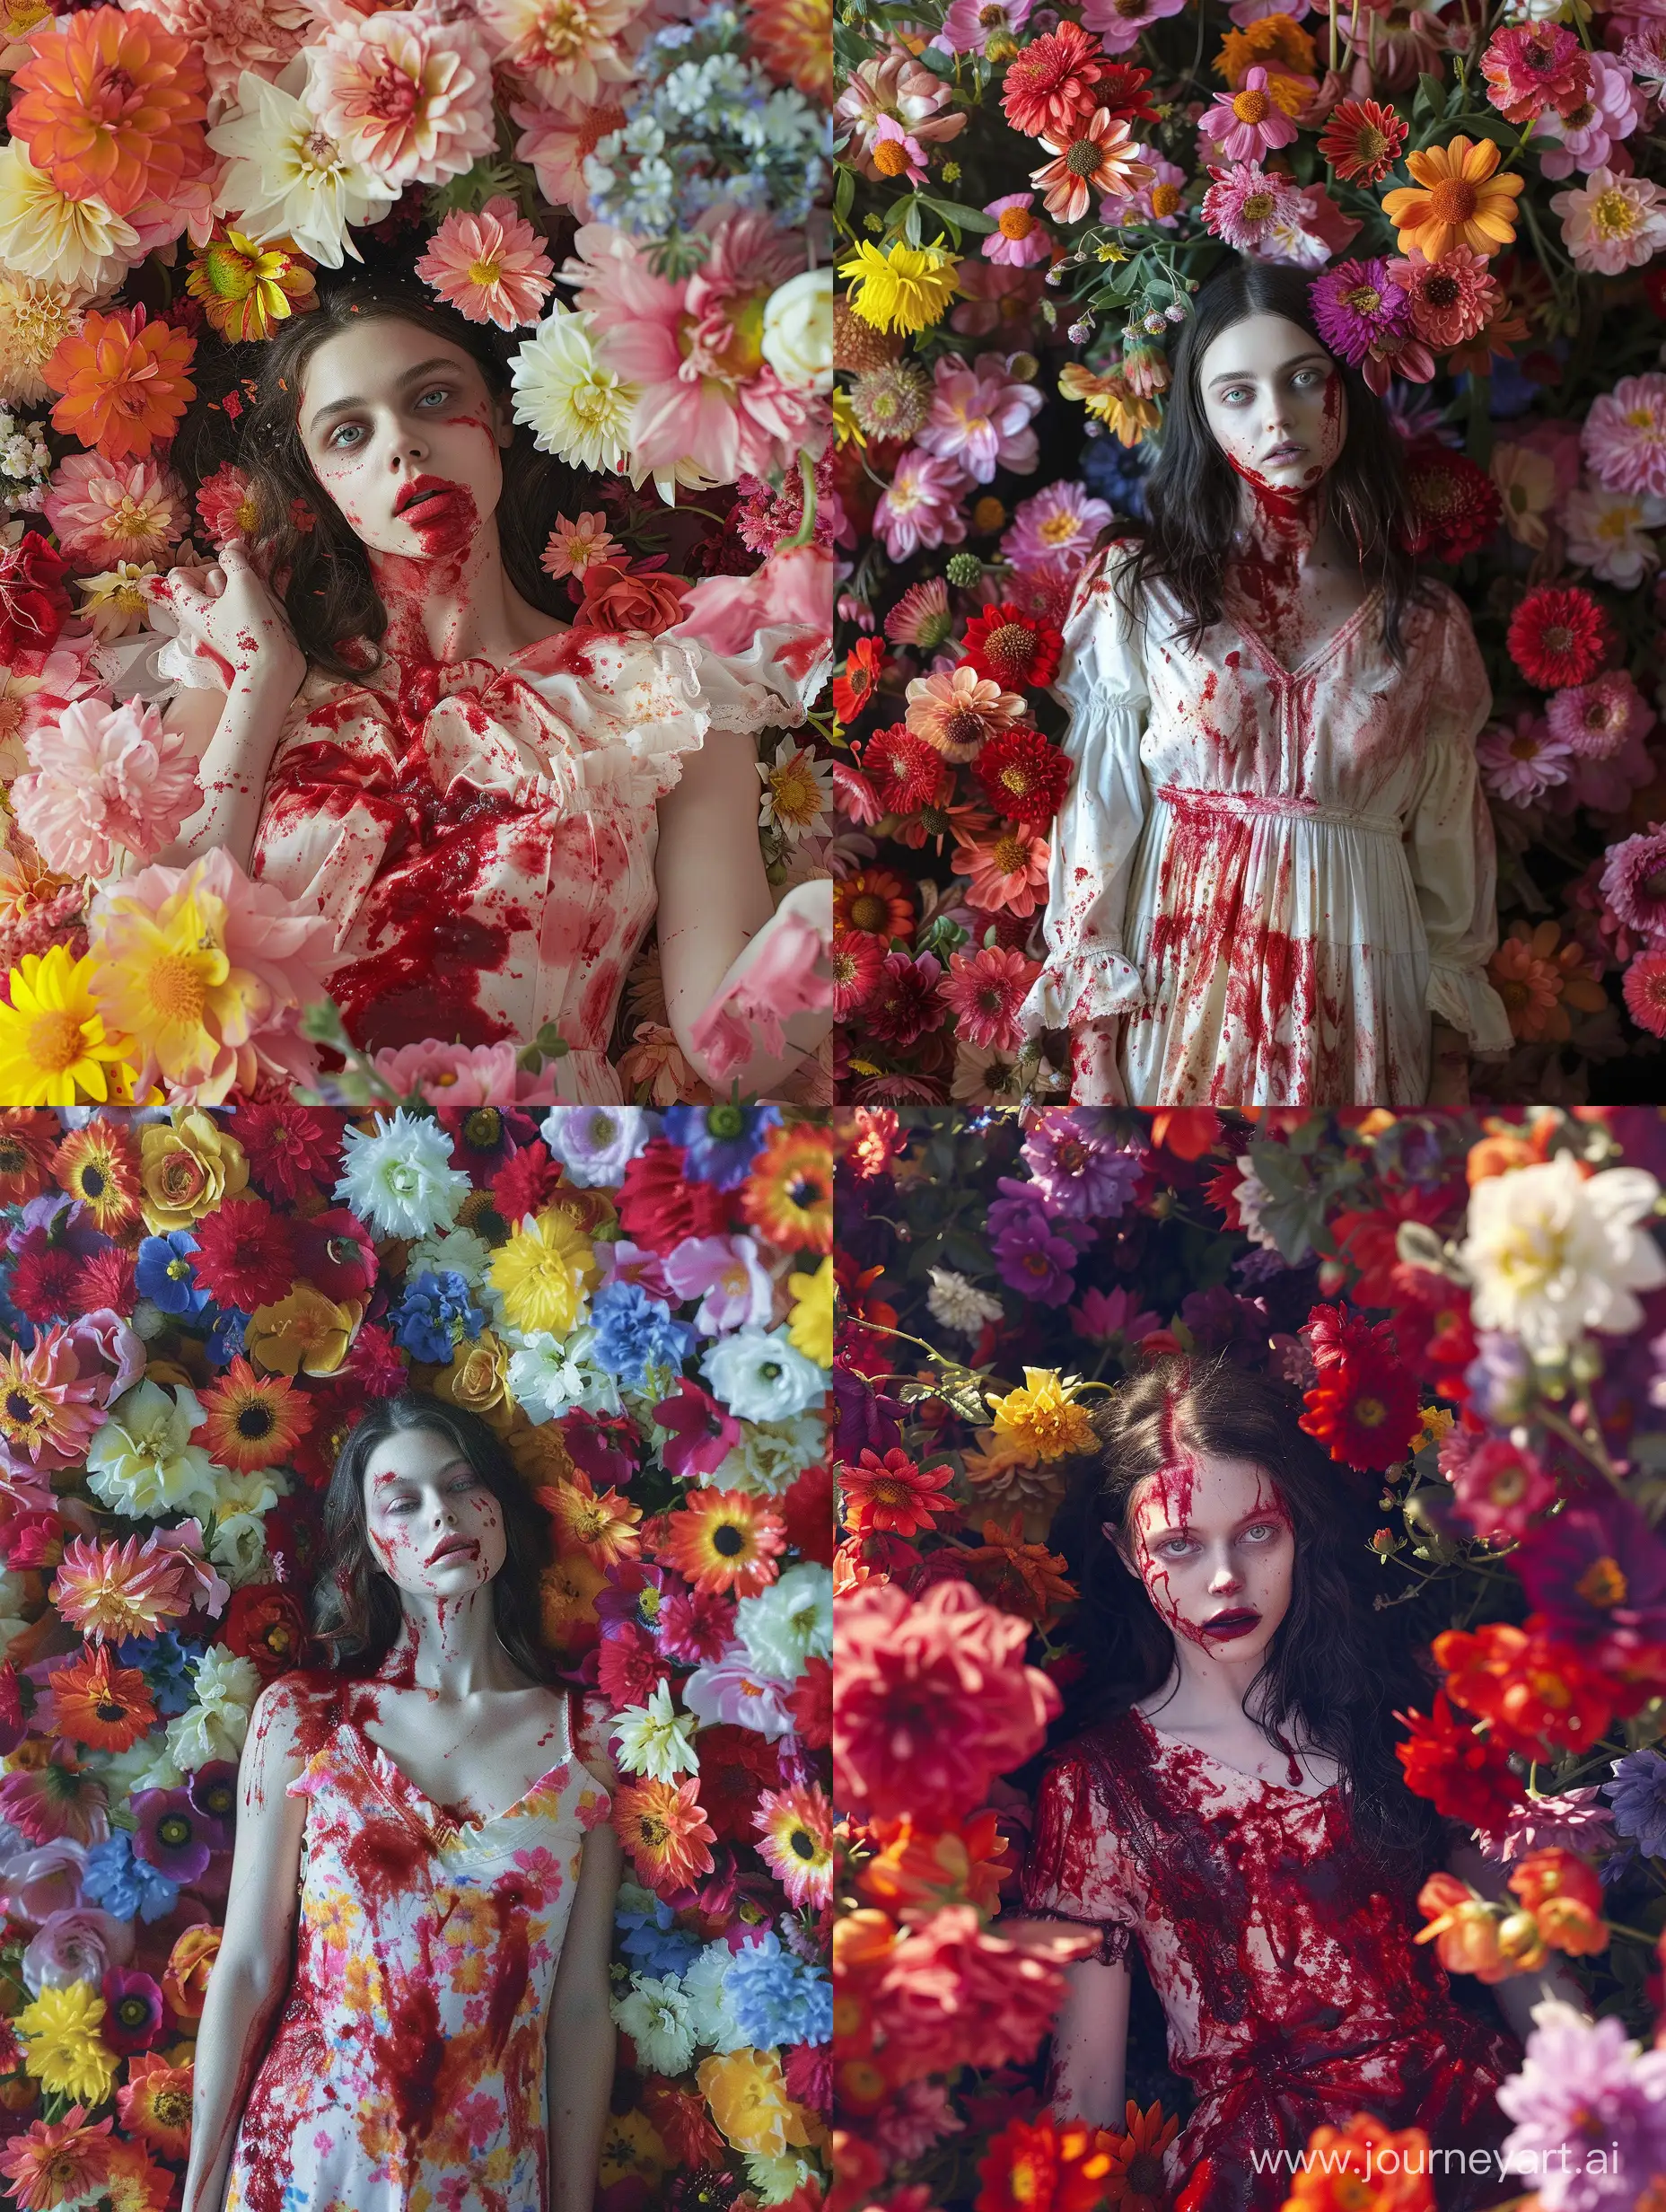 Ethereal-Beauty-Amidst-a-BloodSoaked-Floral-Abyss